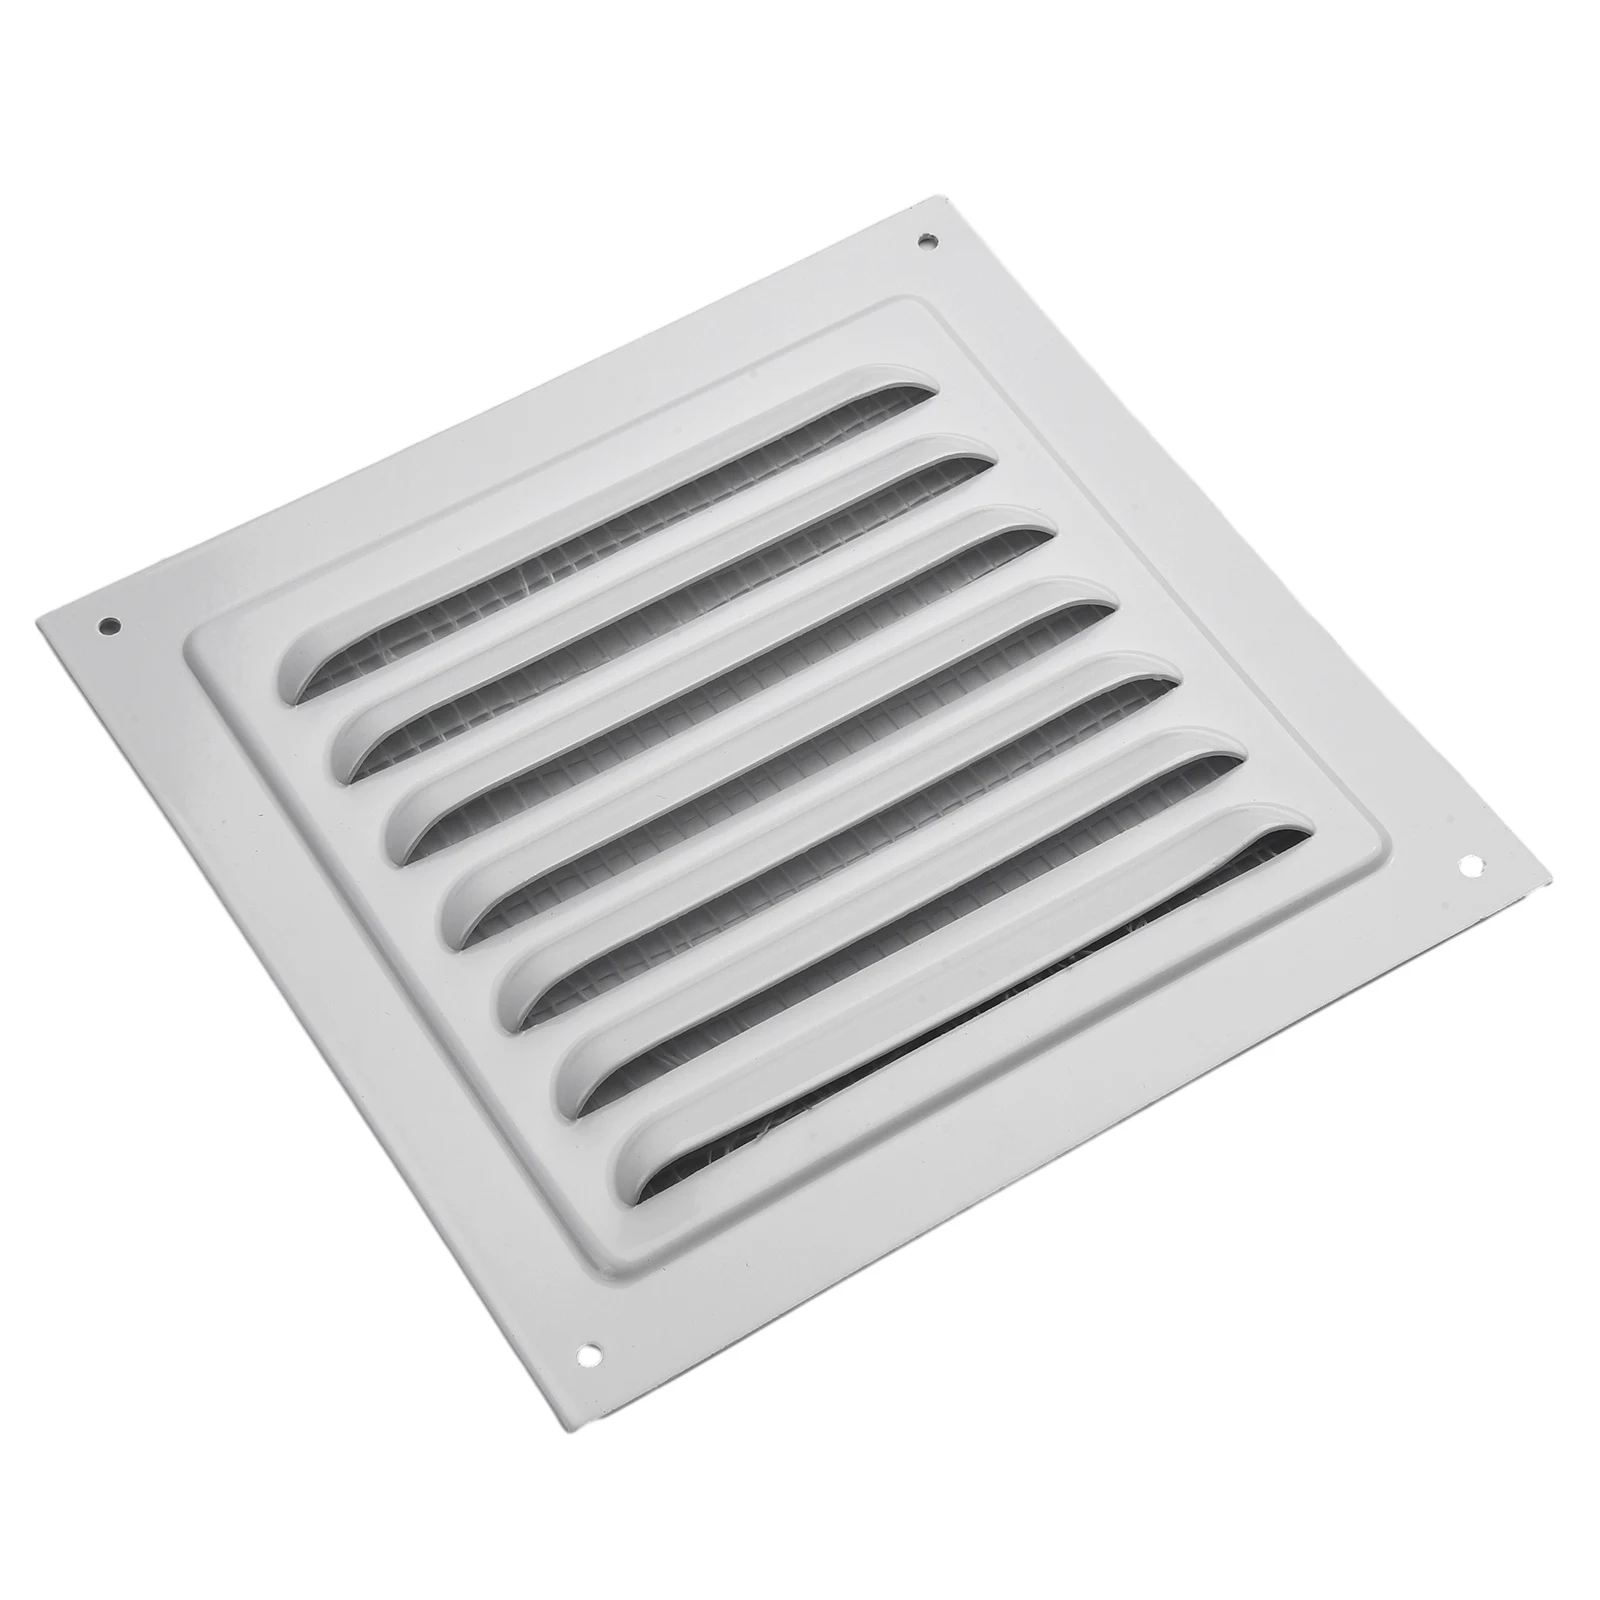 

Lightweight and Long lasting Aluminum Metal Louver Vent Insect Screen Cover Perfect for Duct Vents and Openings